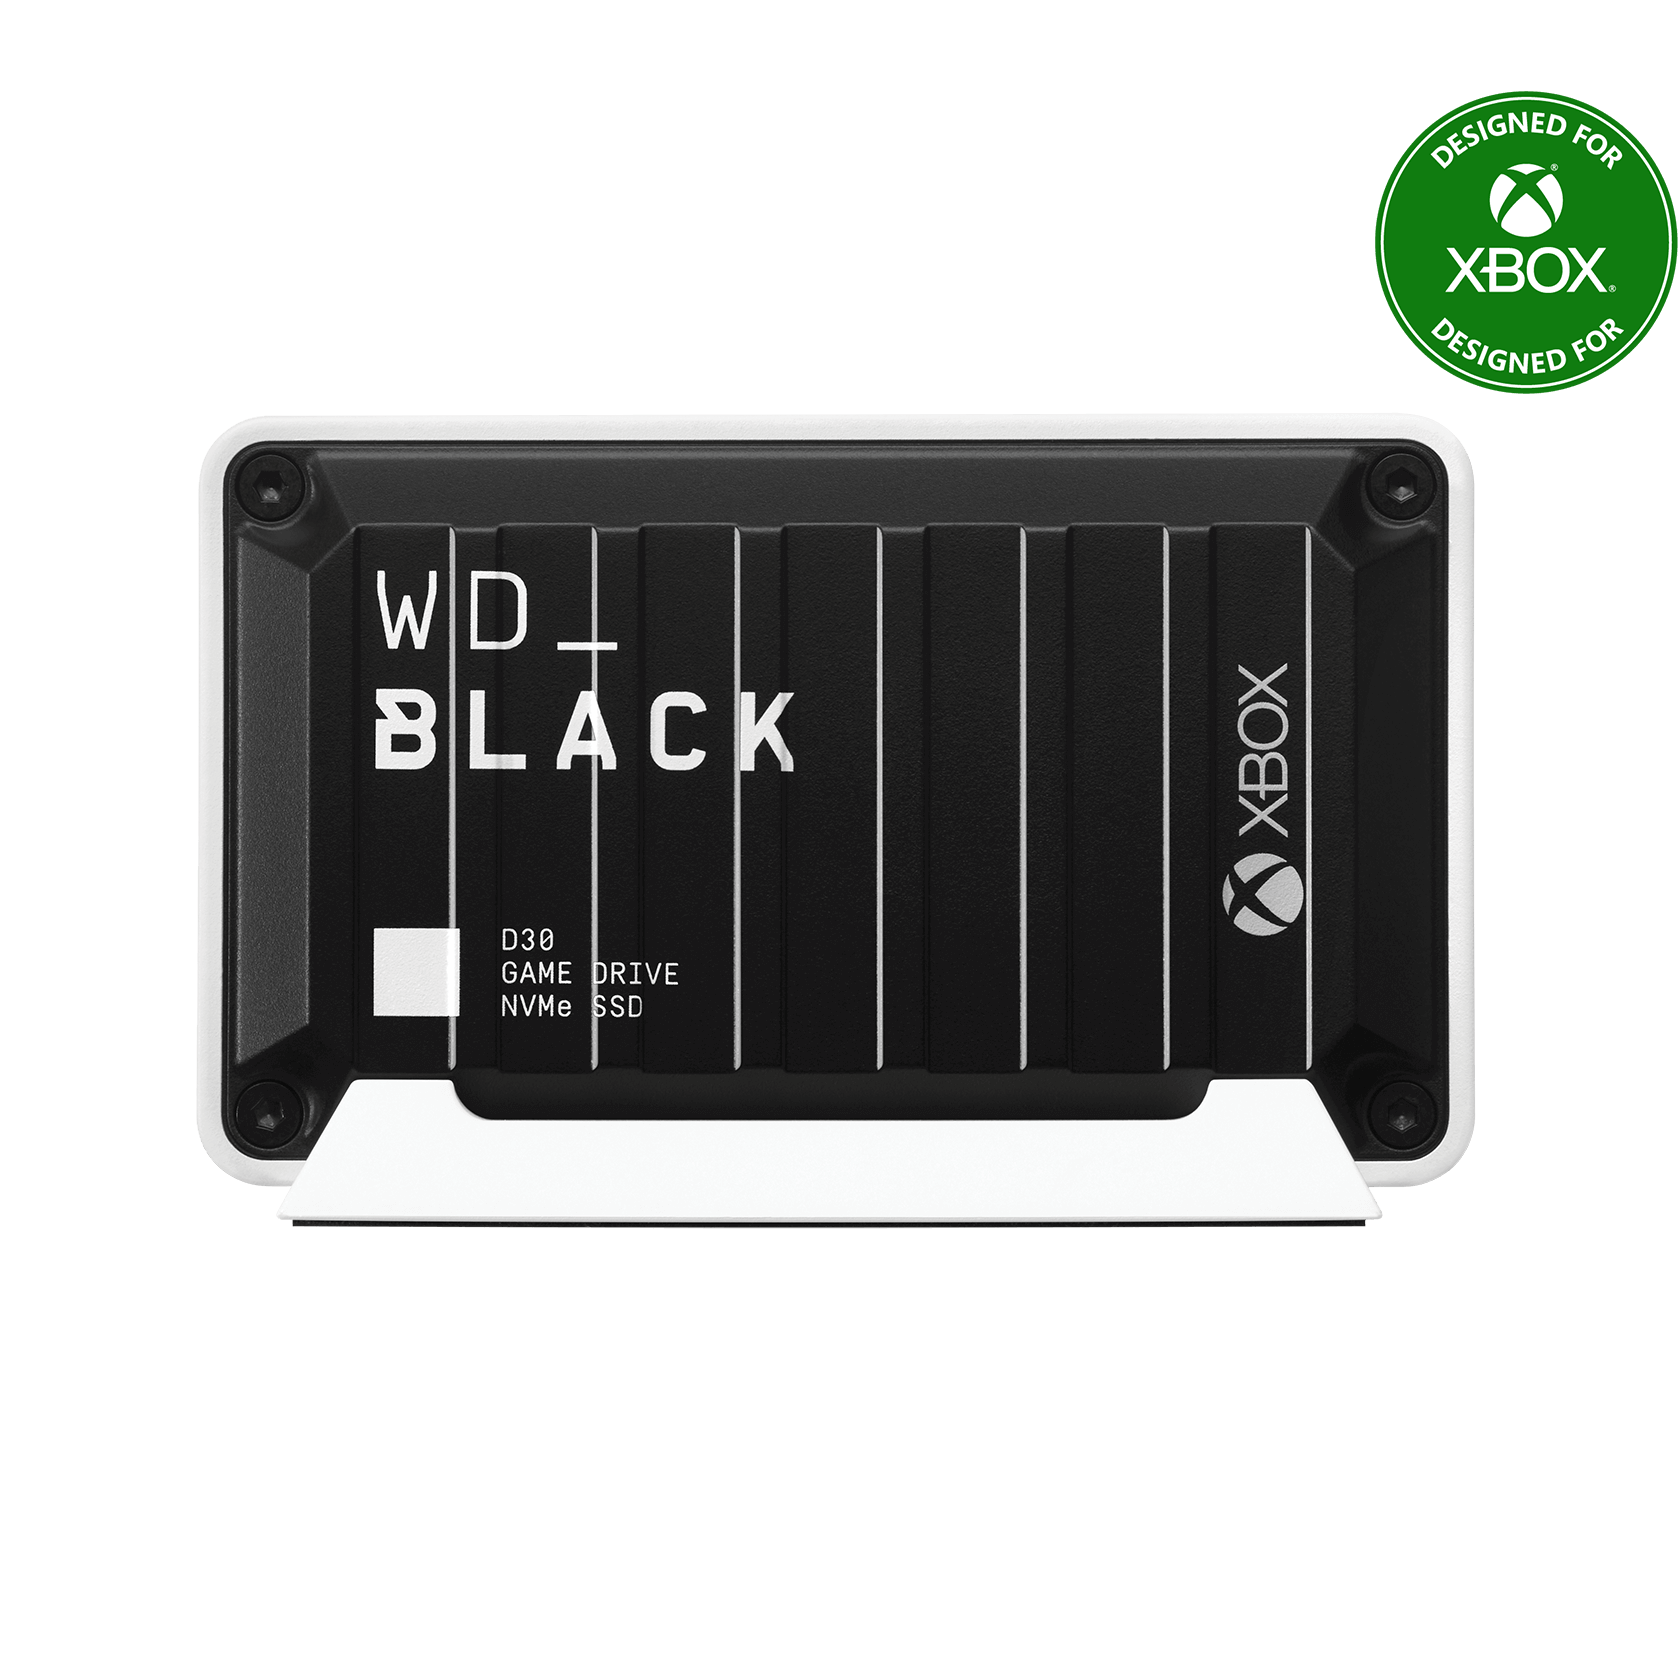 WD Black 1TB WD_Black™ D30 Game Drive for Xbox™ - - WDBAMF0010BBW-WESN